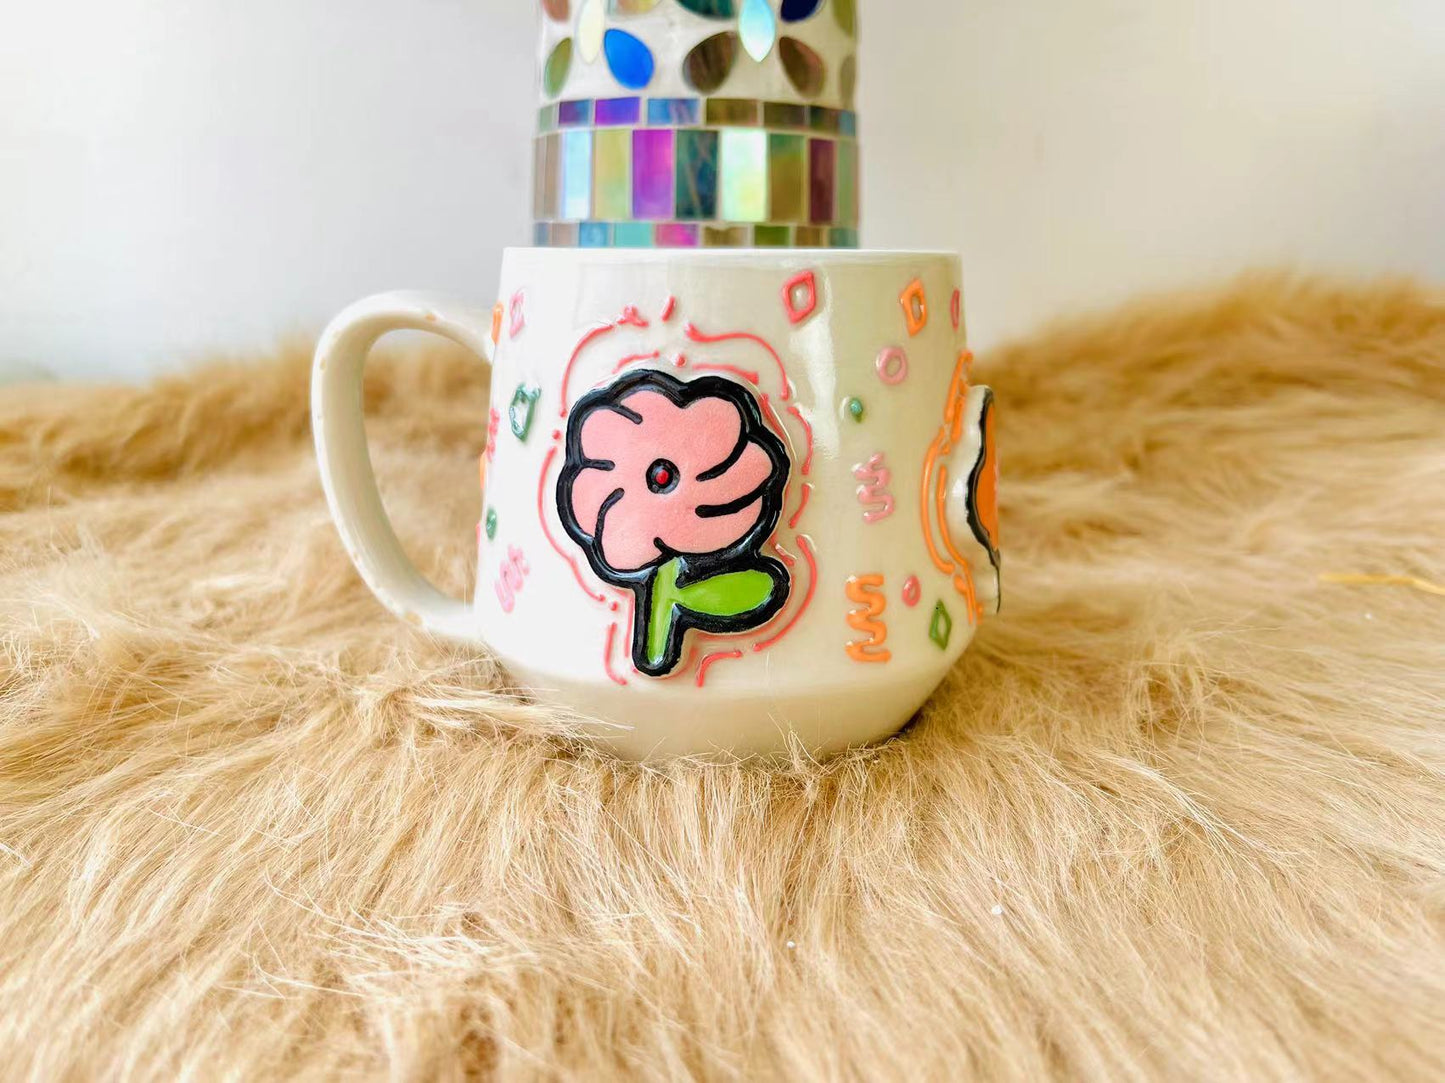 Cute Floral Ceramic Coffee Mug, Personalized Handmade Pottery Cup for Gifts